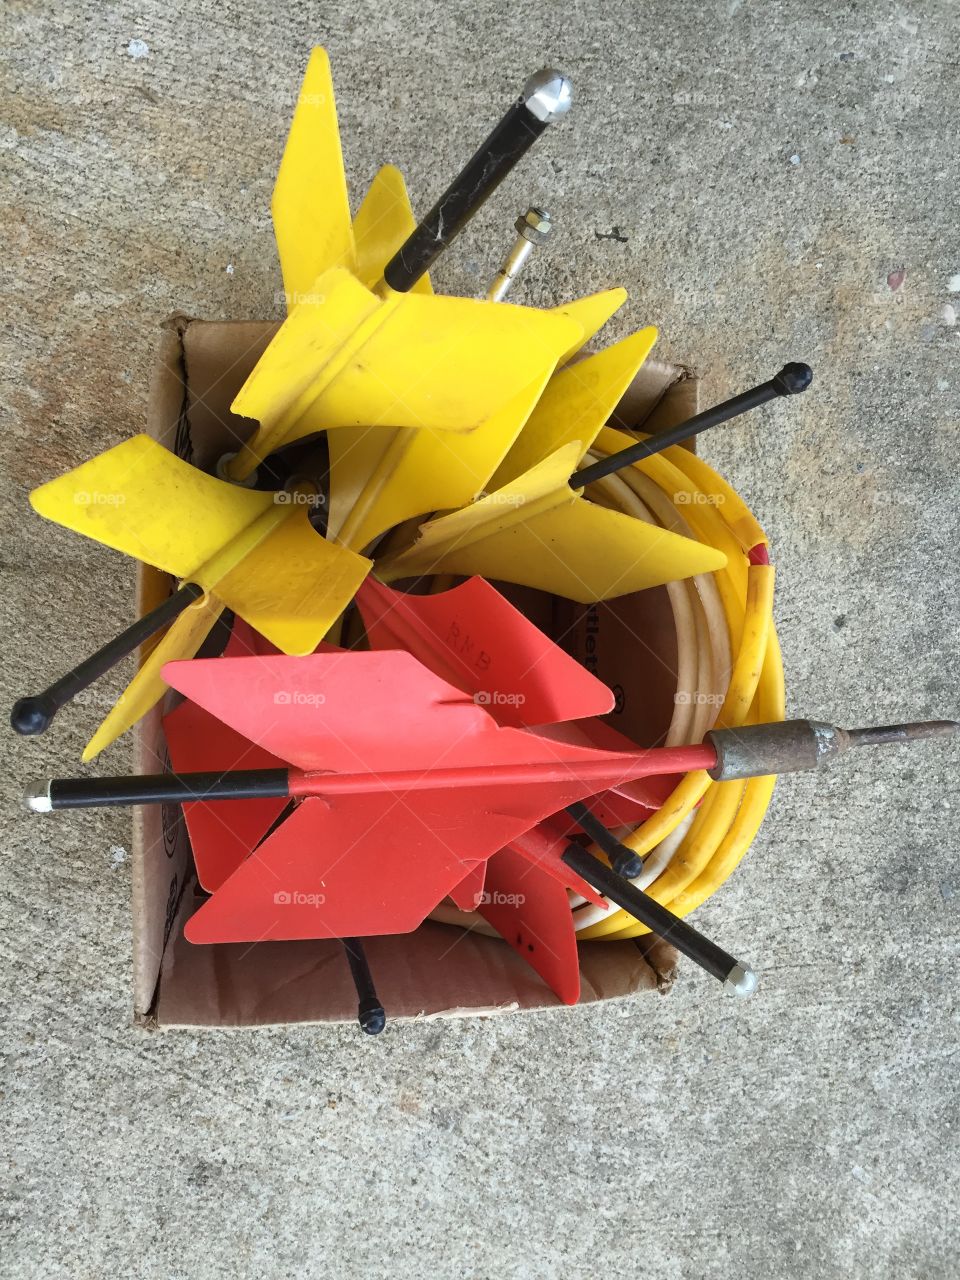 Lawn darts found at a yard sale for $1.00.  Darwinism at its finest!